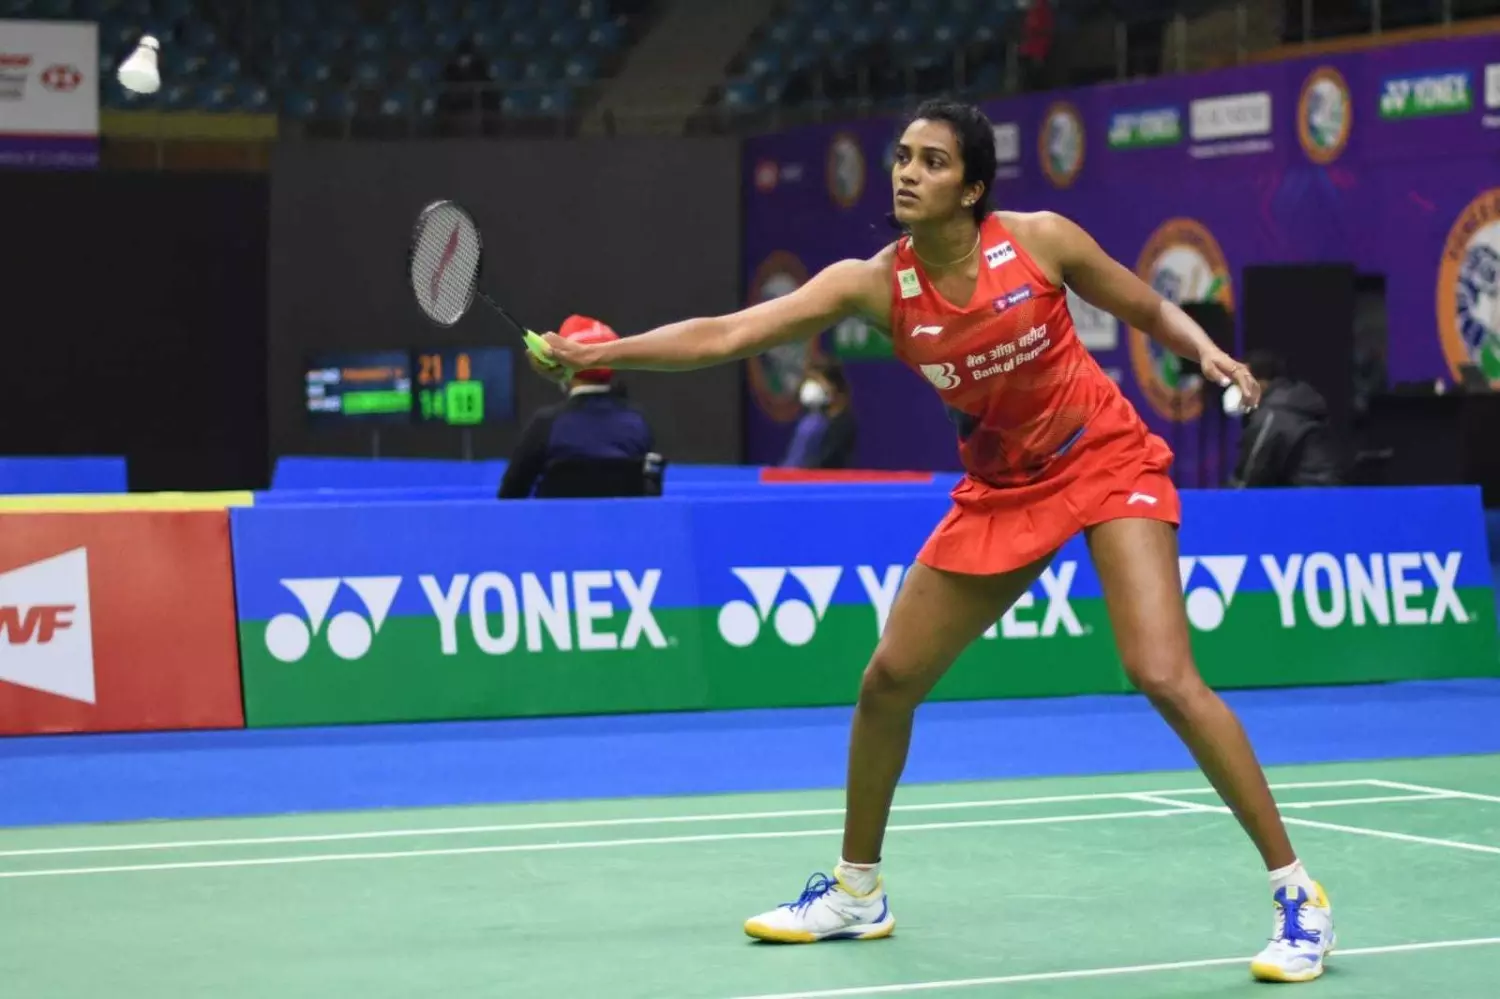 All England Badminton Championship | PV Sindhu handed defeat in first round, Treesa/Gayatri sail in next round